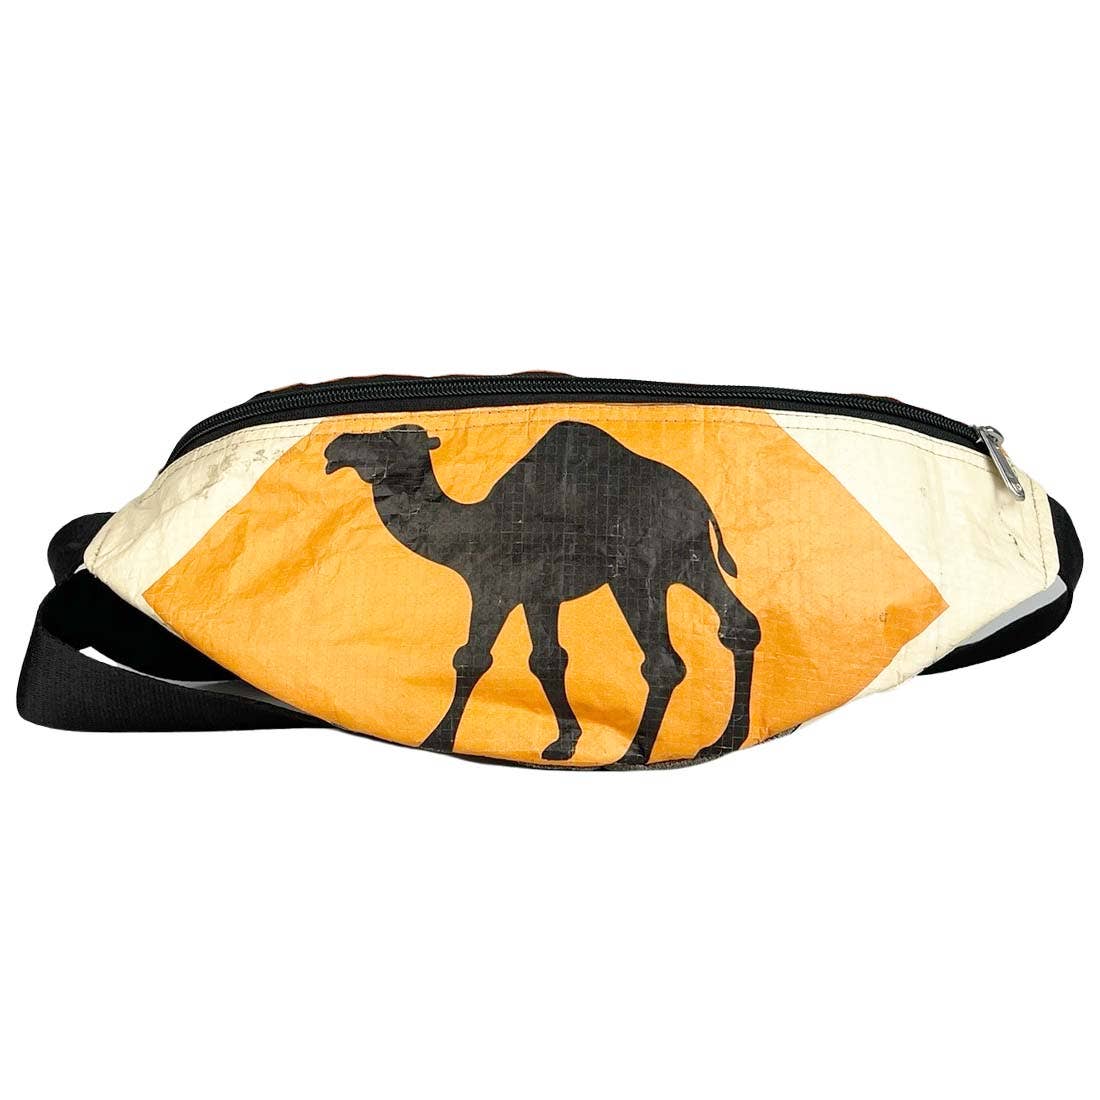 Malia Designs - Camel Recycled Cement Bag Hip Sack -